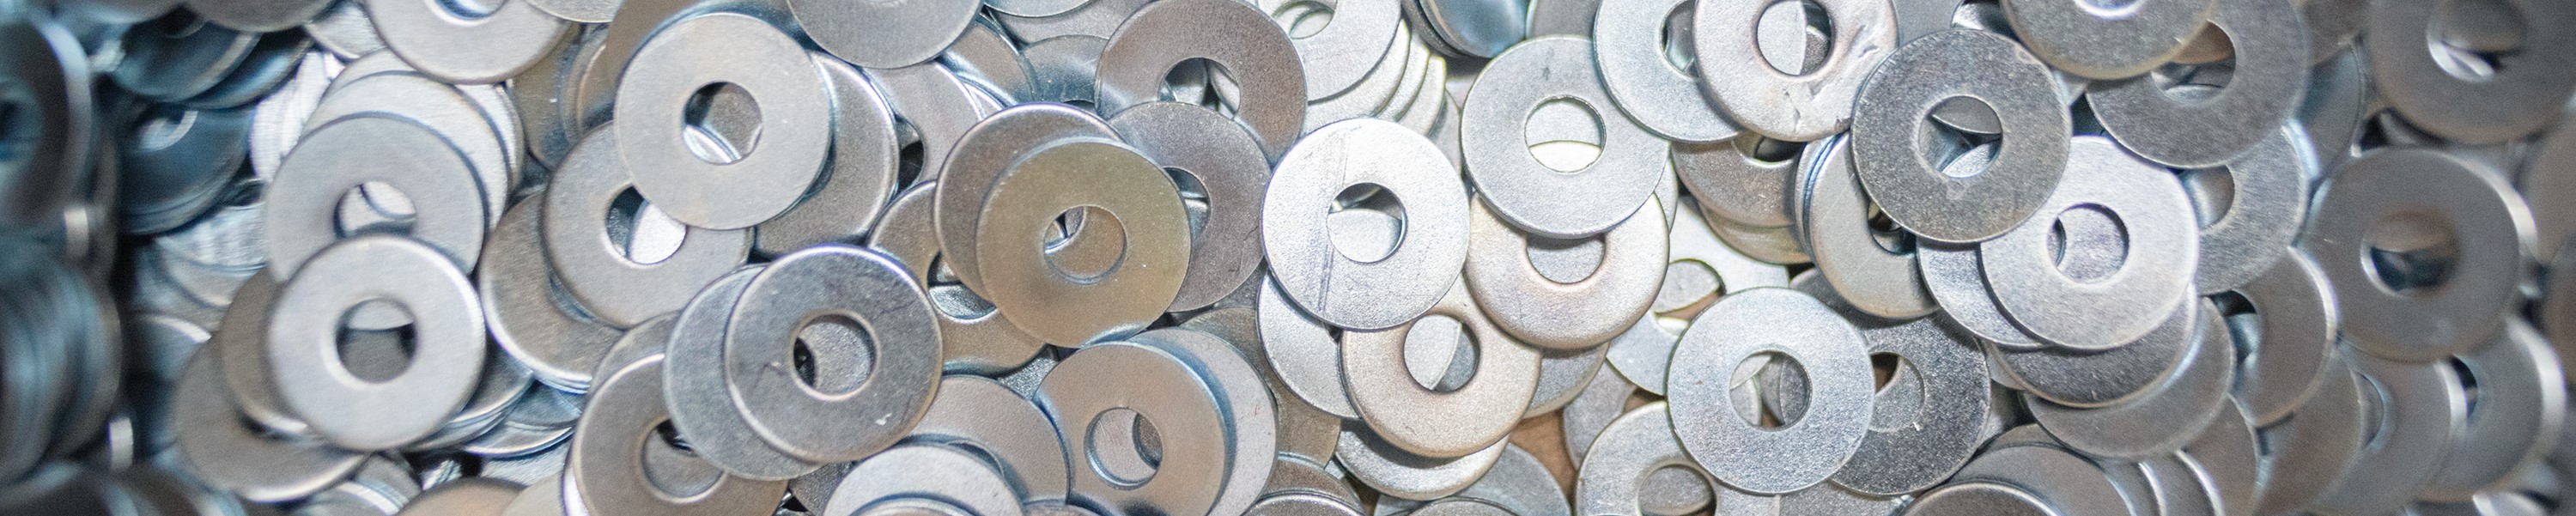 Pile of silver metal washers [1266733372]-1